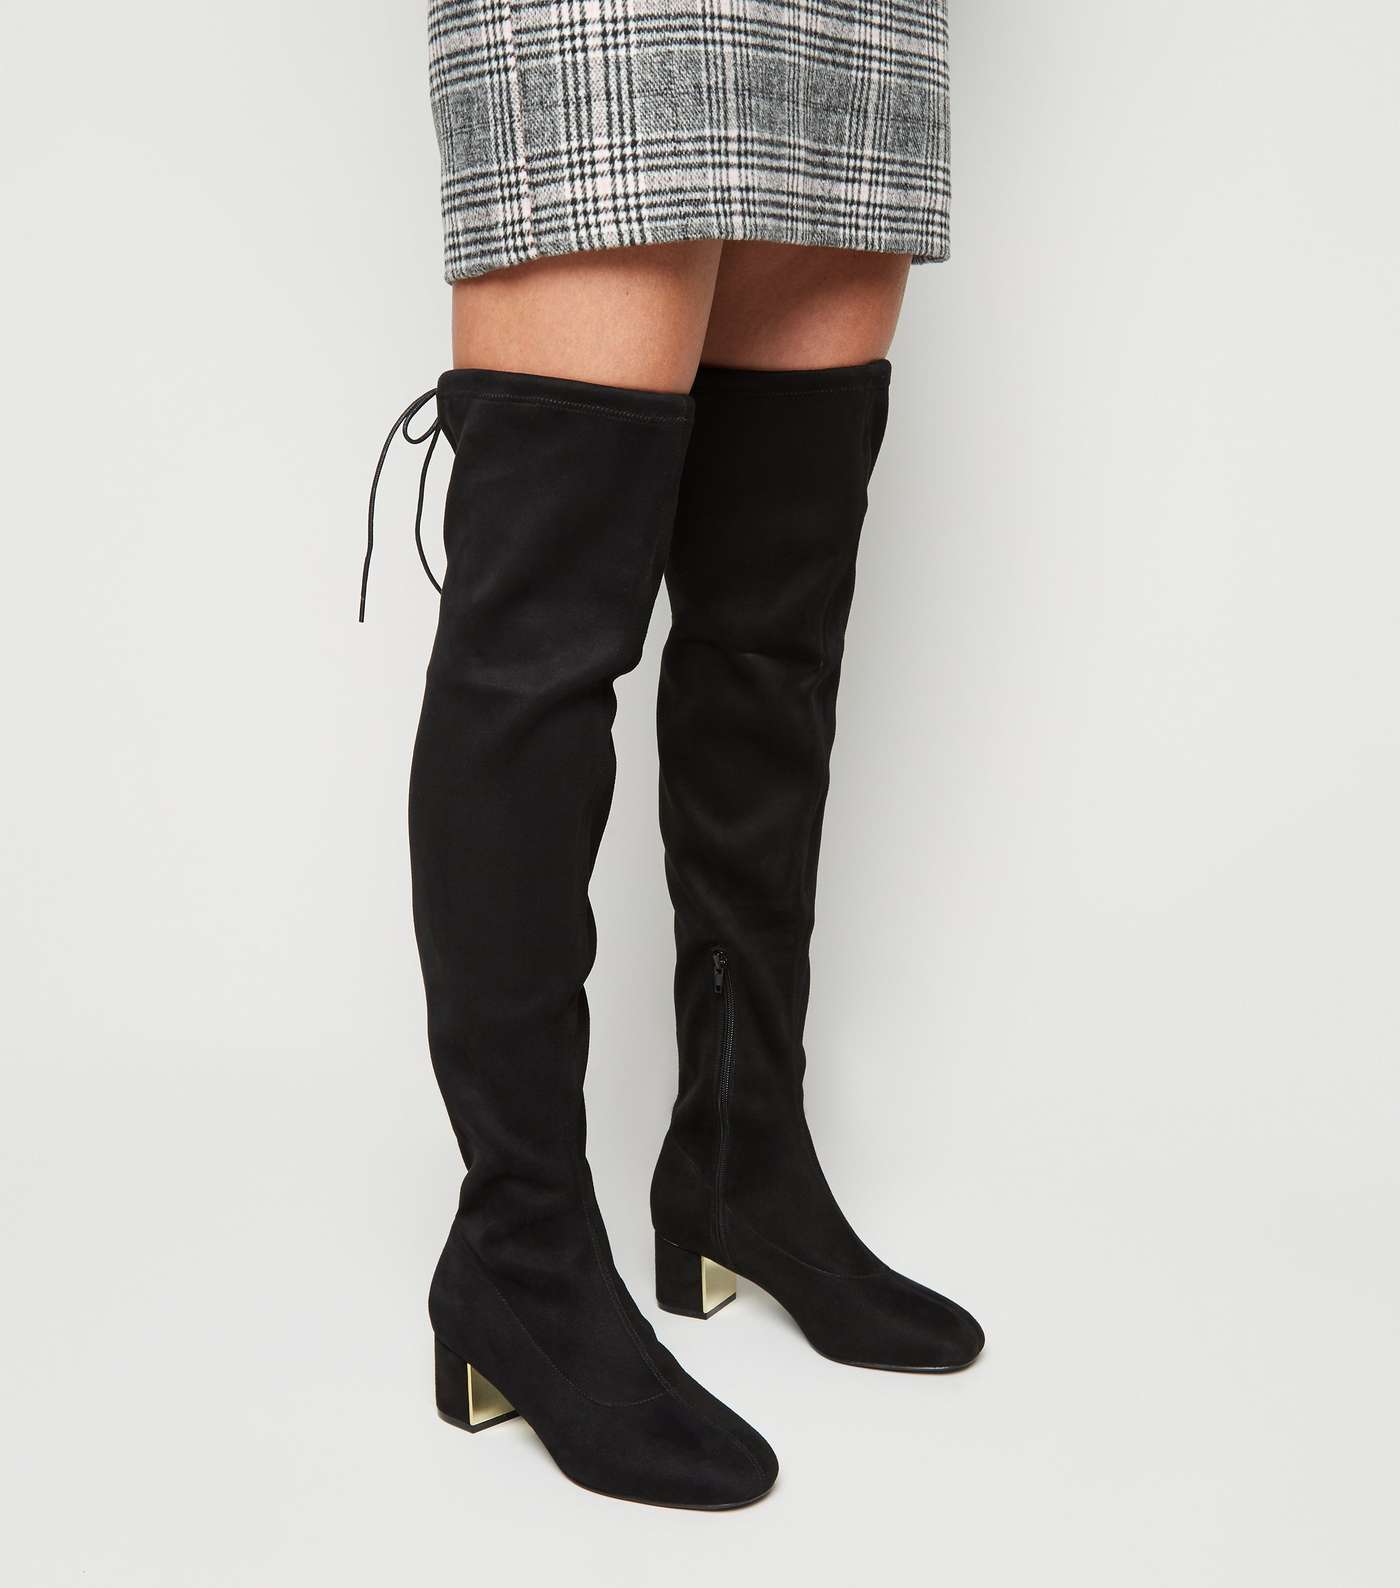 Wide Fit Black Suedette Over the Knee Boots Image 2